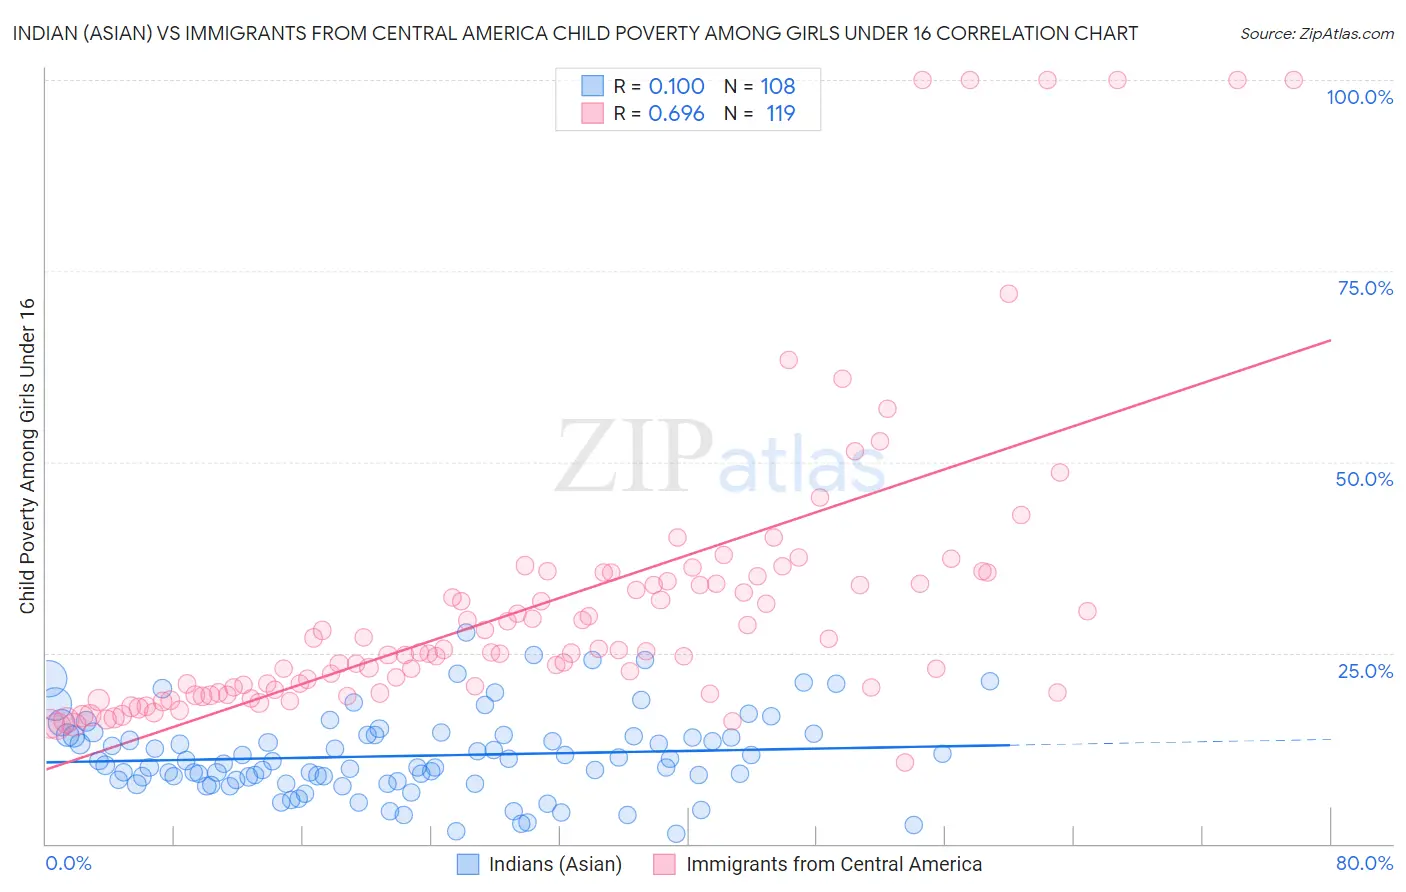 Indian (Asian) vs Immigrants from Central America Child Poverty Among Girls Under 16